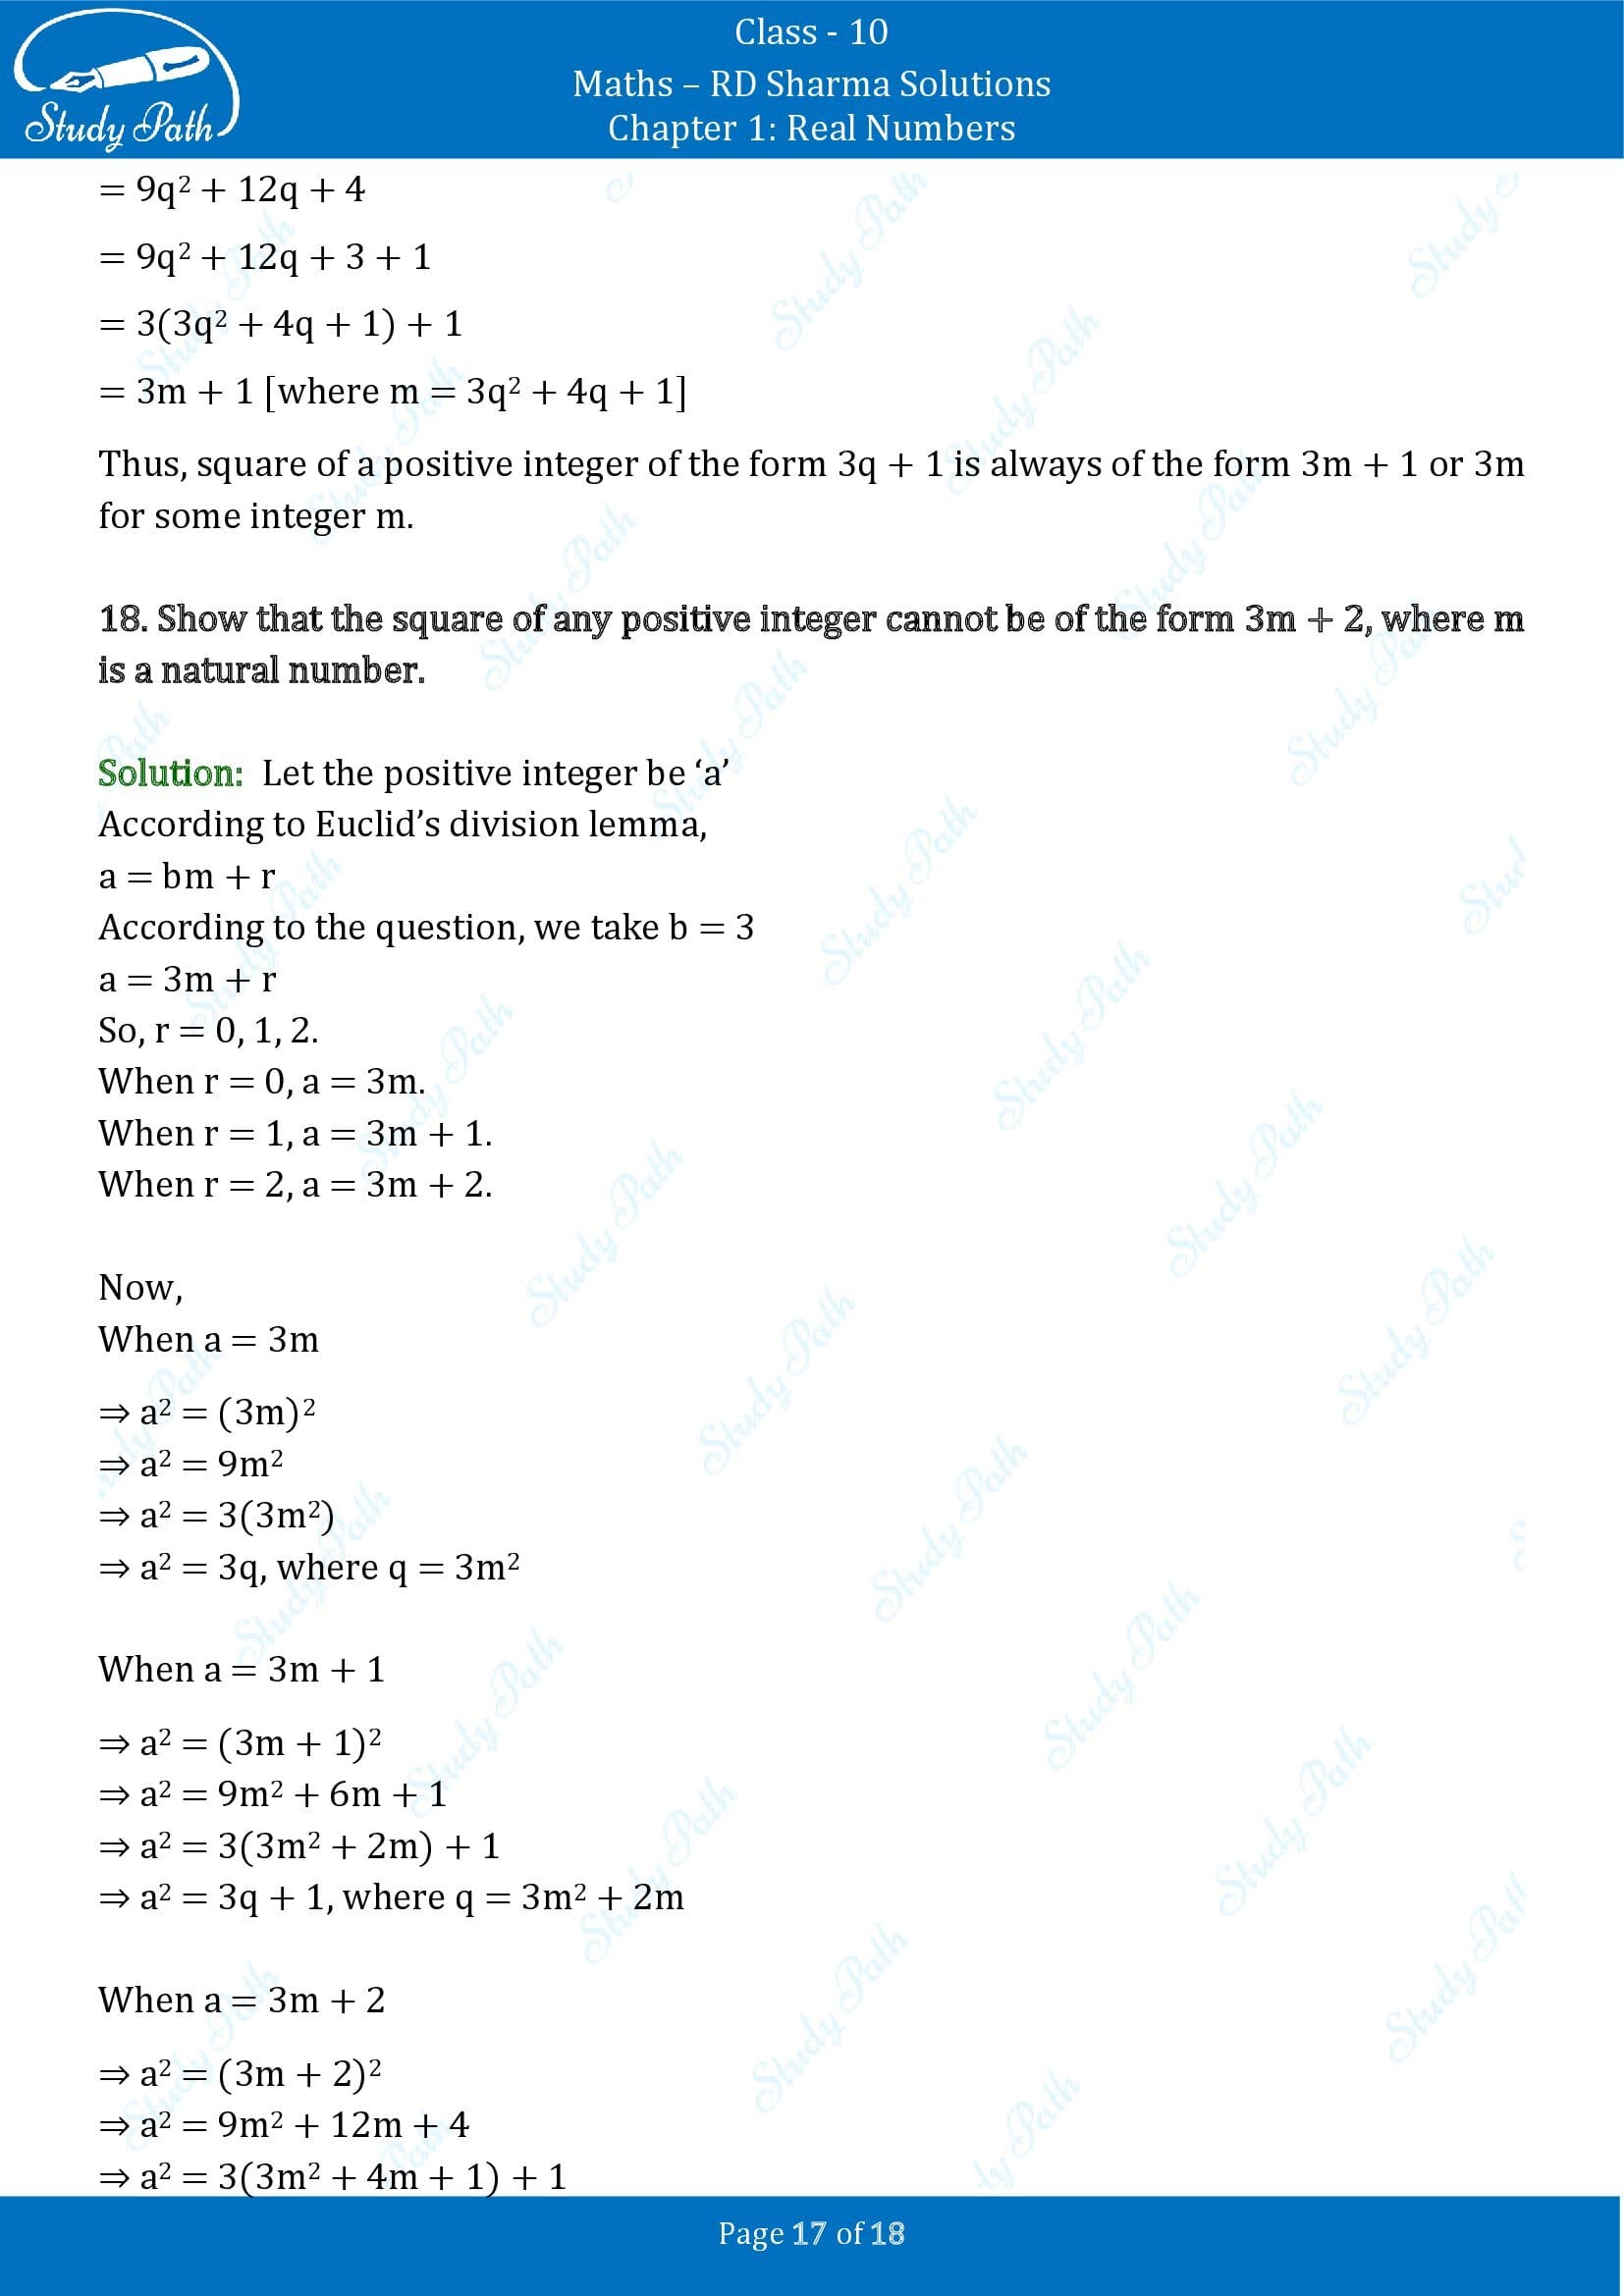 RD Sharma Solutions Class 10 Chapter 1 Real Numbers Exercise 1.1 00017